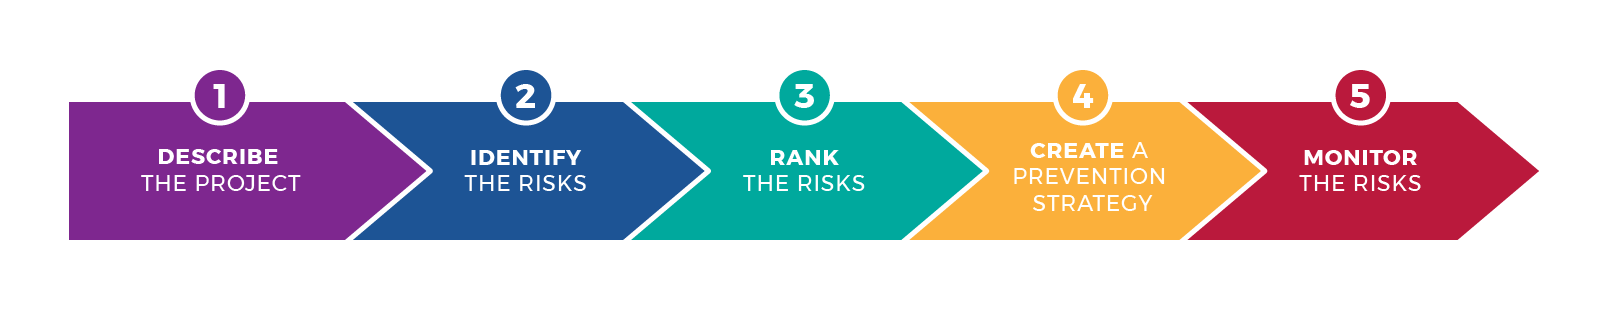 Completing these 5 steps will ensure effective risk management throughout the project life cycle.  Describing the project 2. Identifying the risks 3. Ranking the risks 4. Prevention strategy 5. Monitoring the risks